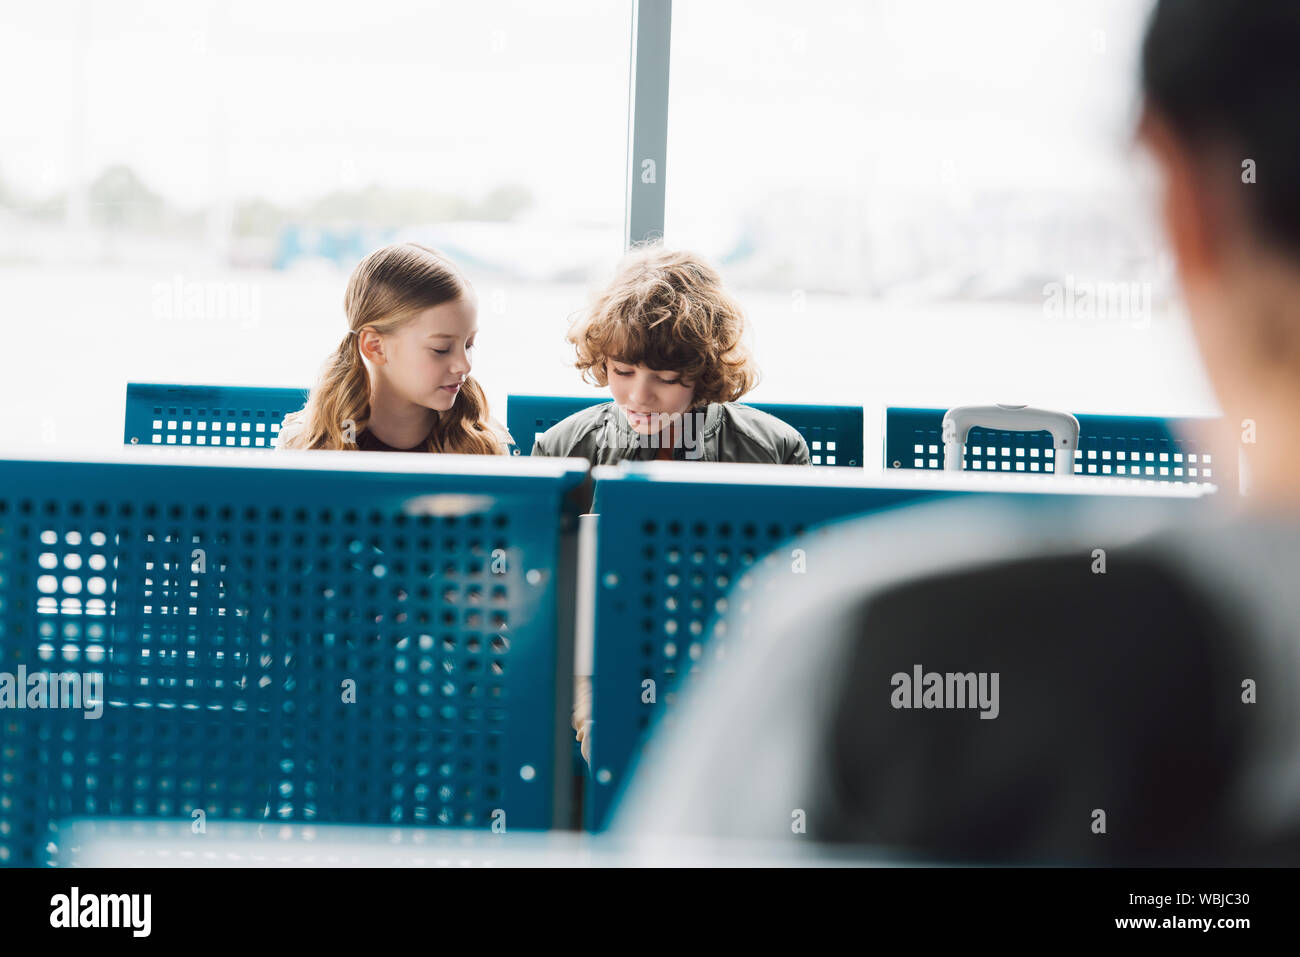 kids sitting and talking in waiting hall with blue seats in airport Stock Photo